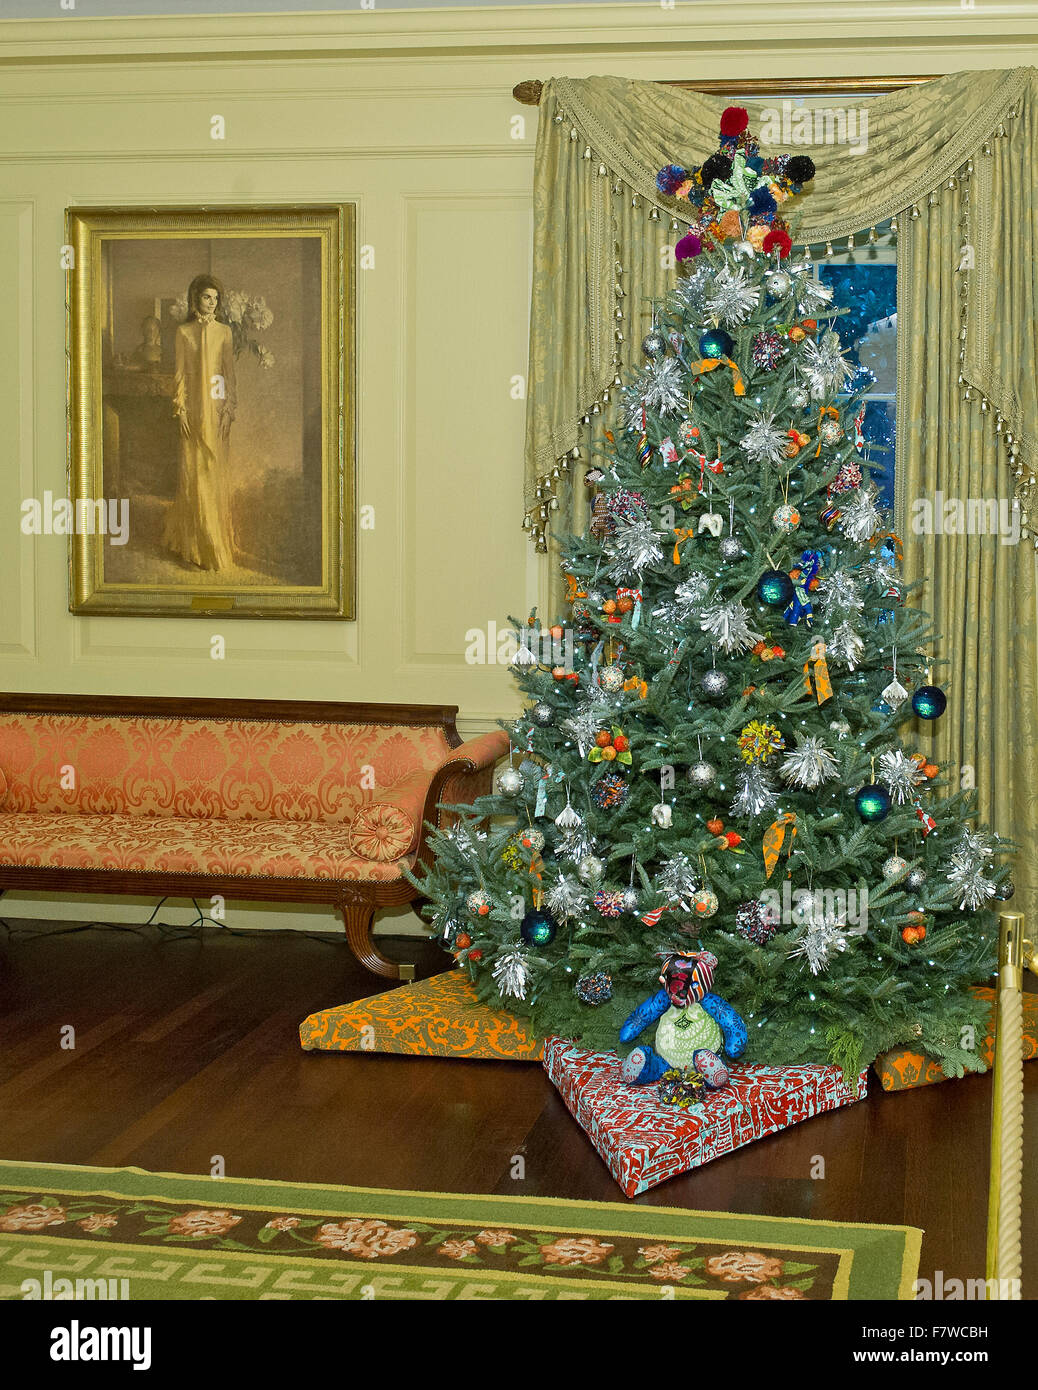 Washington DC, USA. 2nd December, 2015. A Christmas tree near the portrait of former first lady Jacqueline Bouvier Kennedy (Onassis) in the Vermeil Room as part of the 2015 White House Christmas theme 'A Timeless Tradition' at the White House in Washington, DC Credit:  dpa picture alliance/Alamy Live News Stock Photo